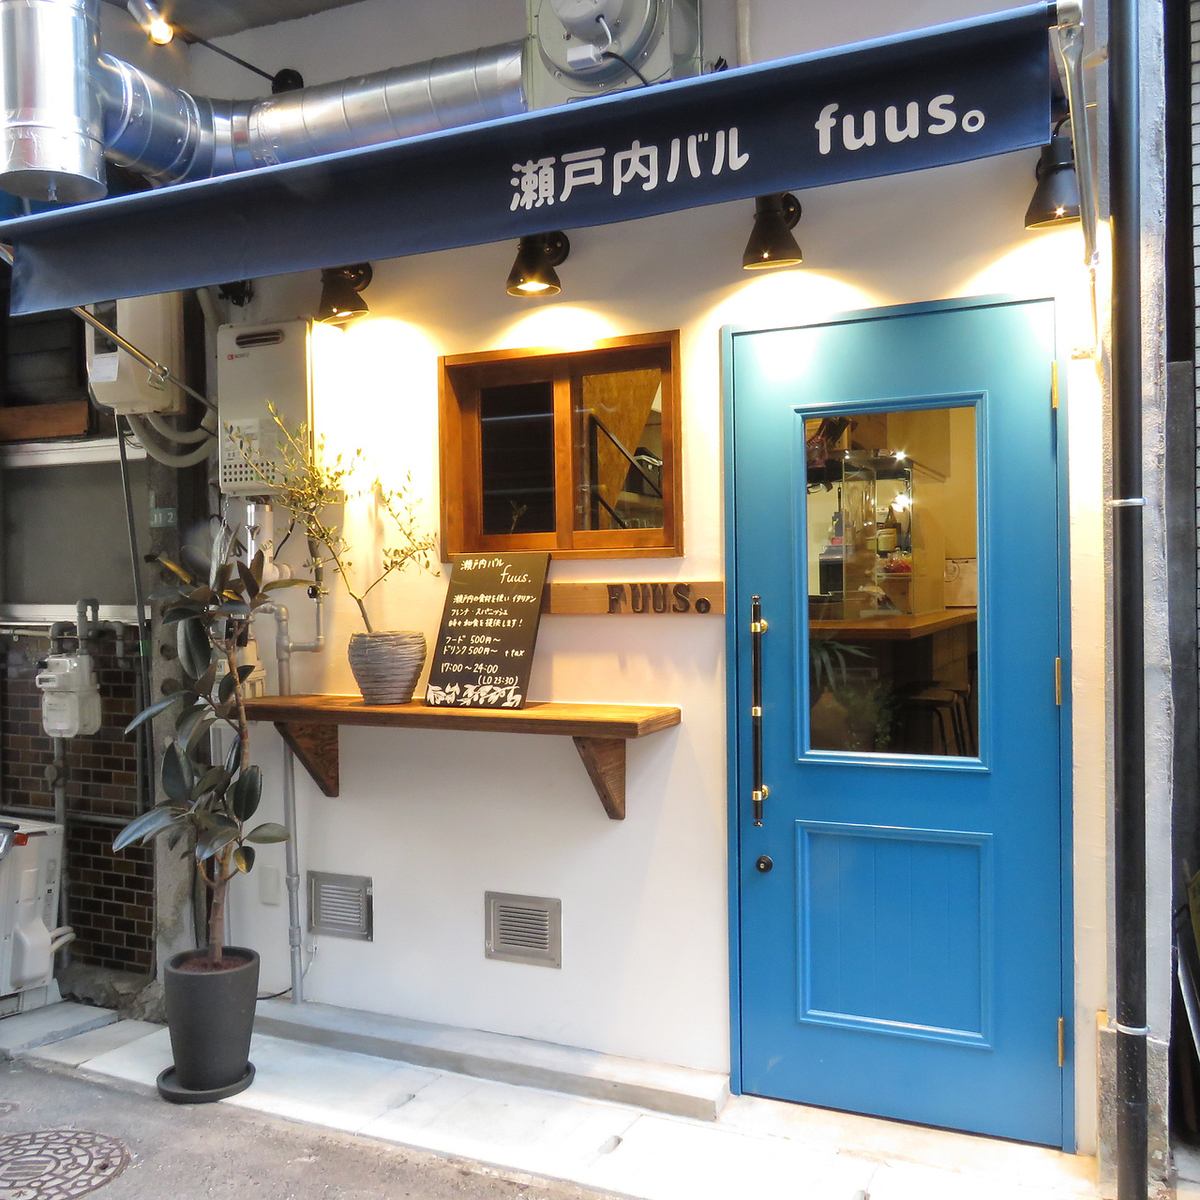 A stylish Italian/French bar in Ekinishi! Perfect for dates and girls' nights out.